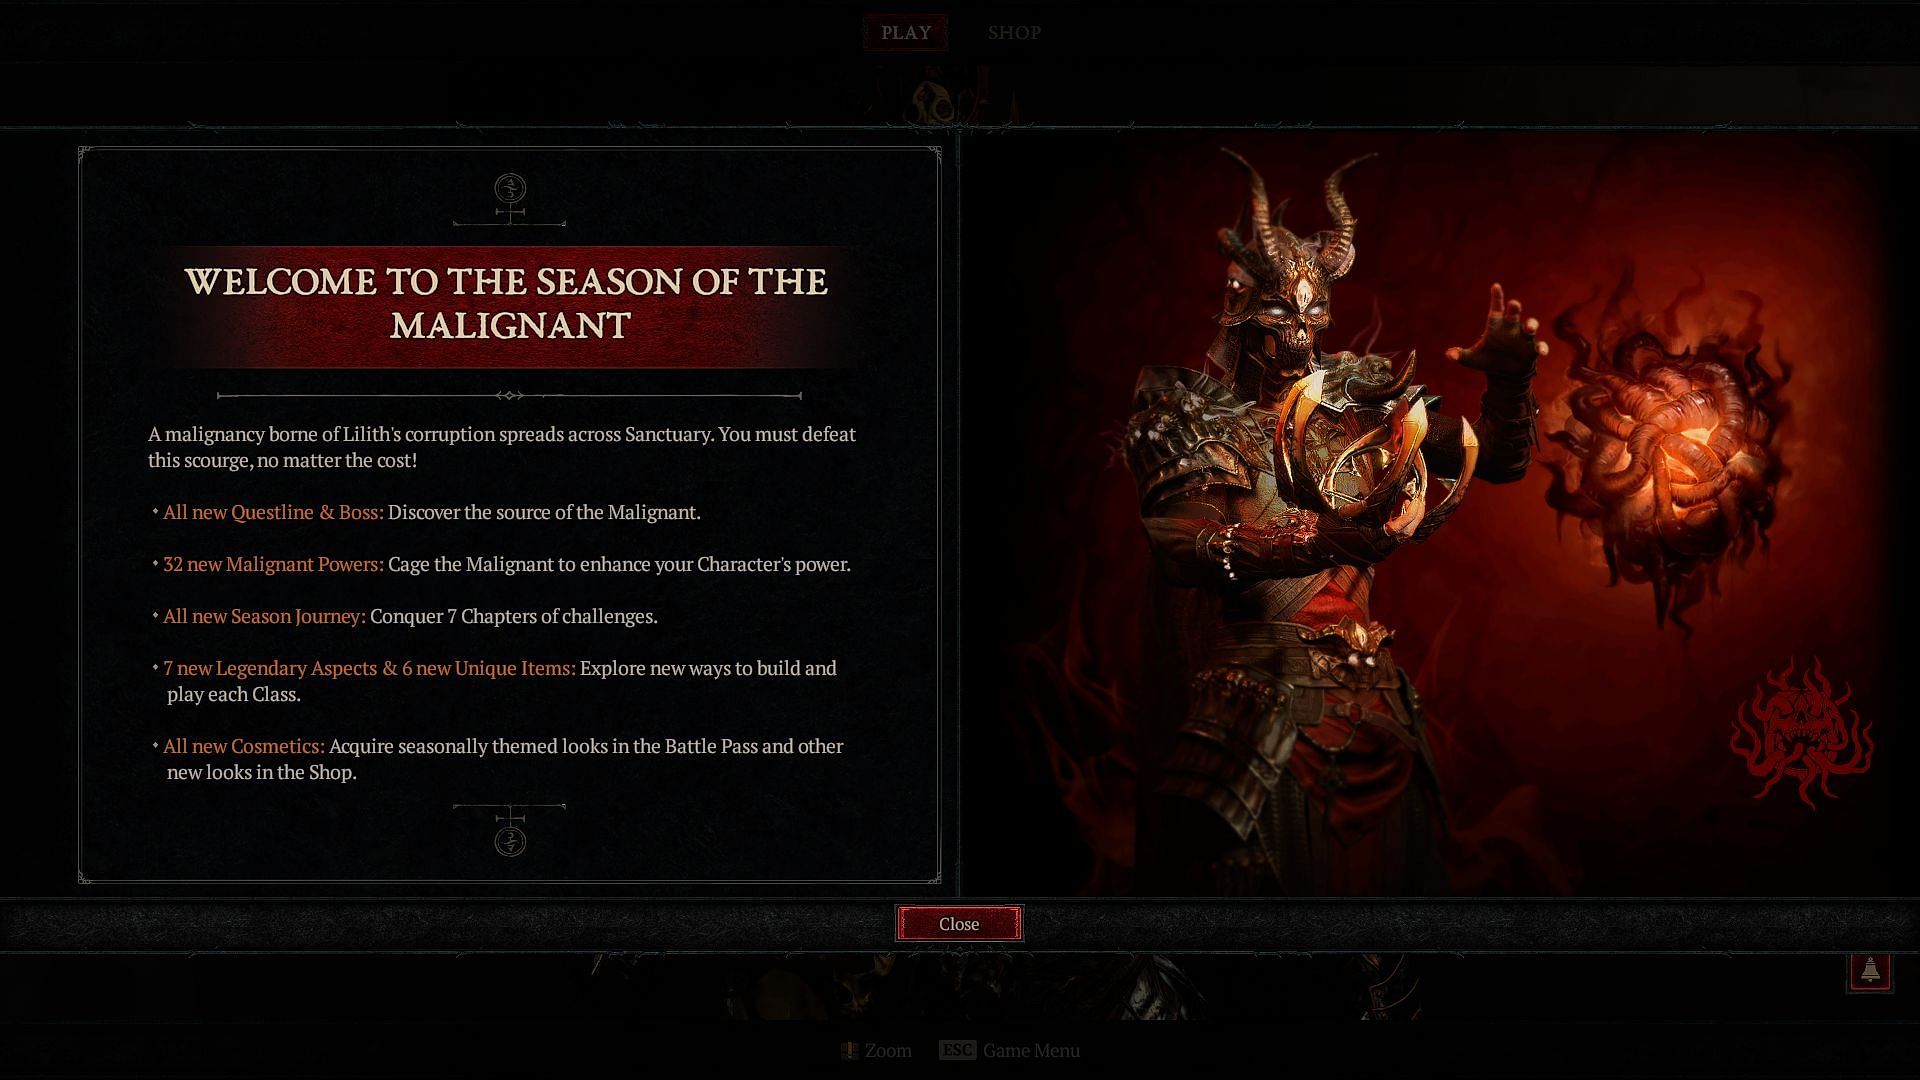 Players would like faster gameplay implemented in Season 1 (Image via Sportskeeda, Blizzard Entertainment)